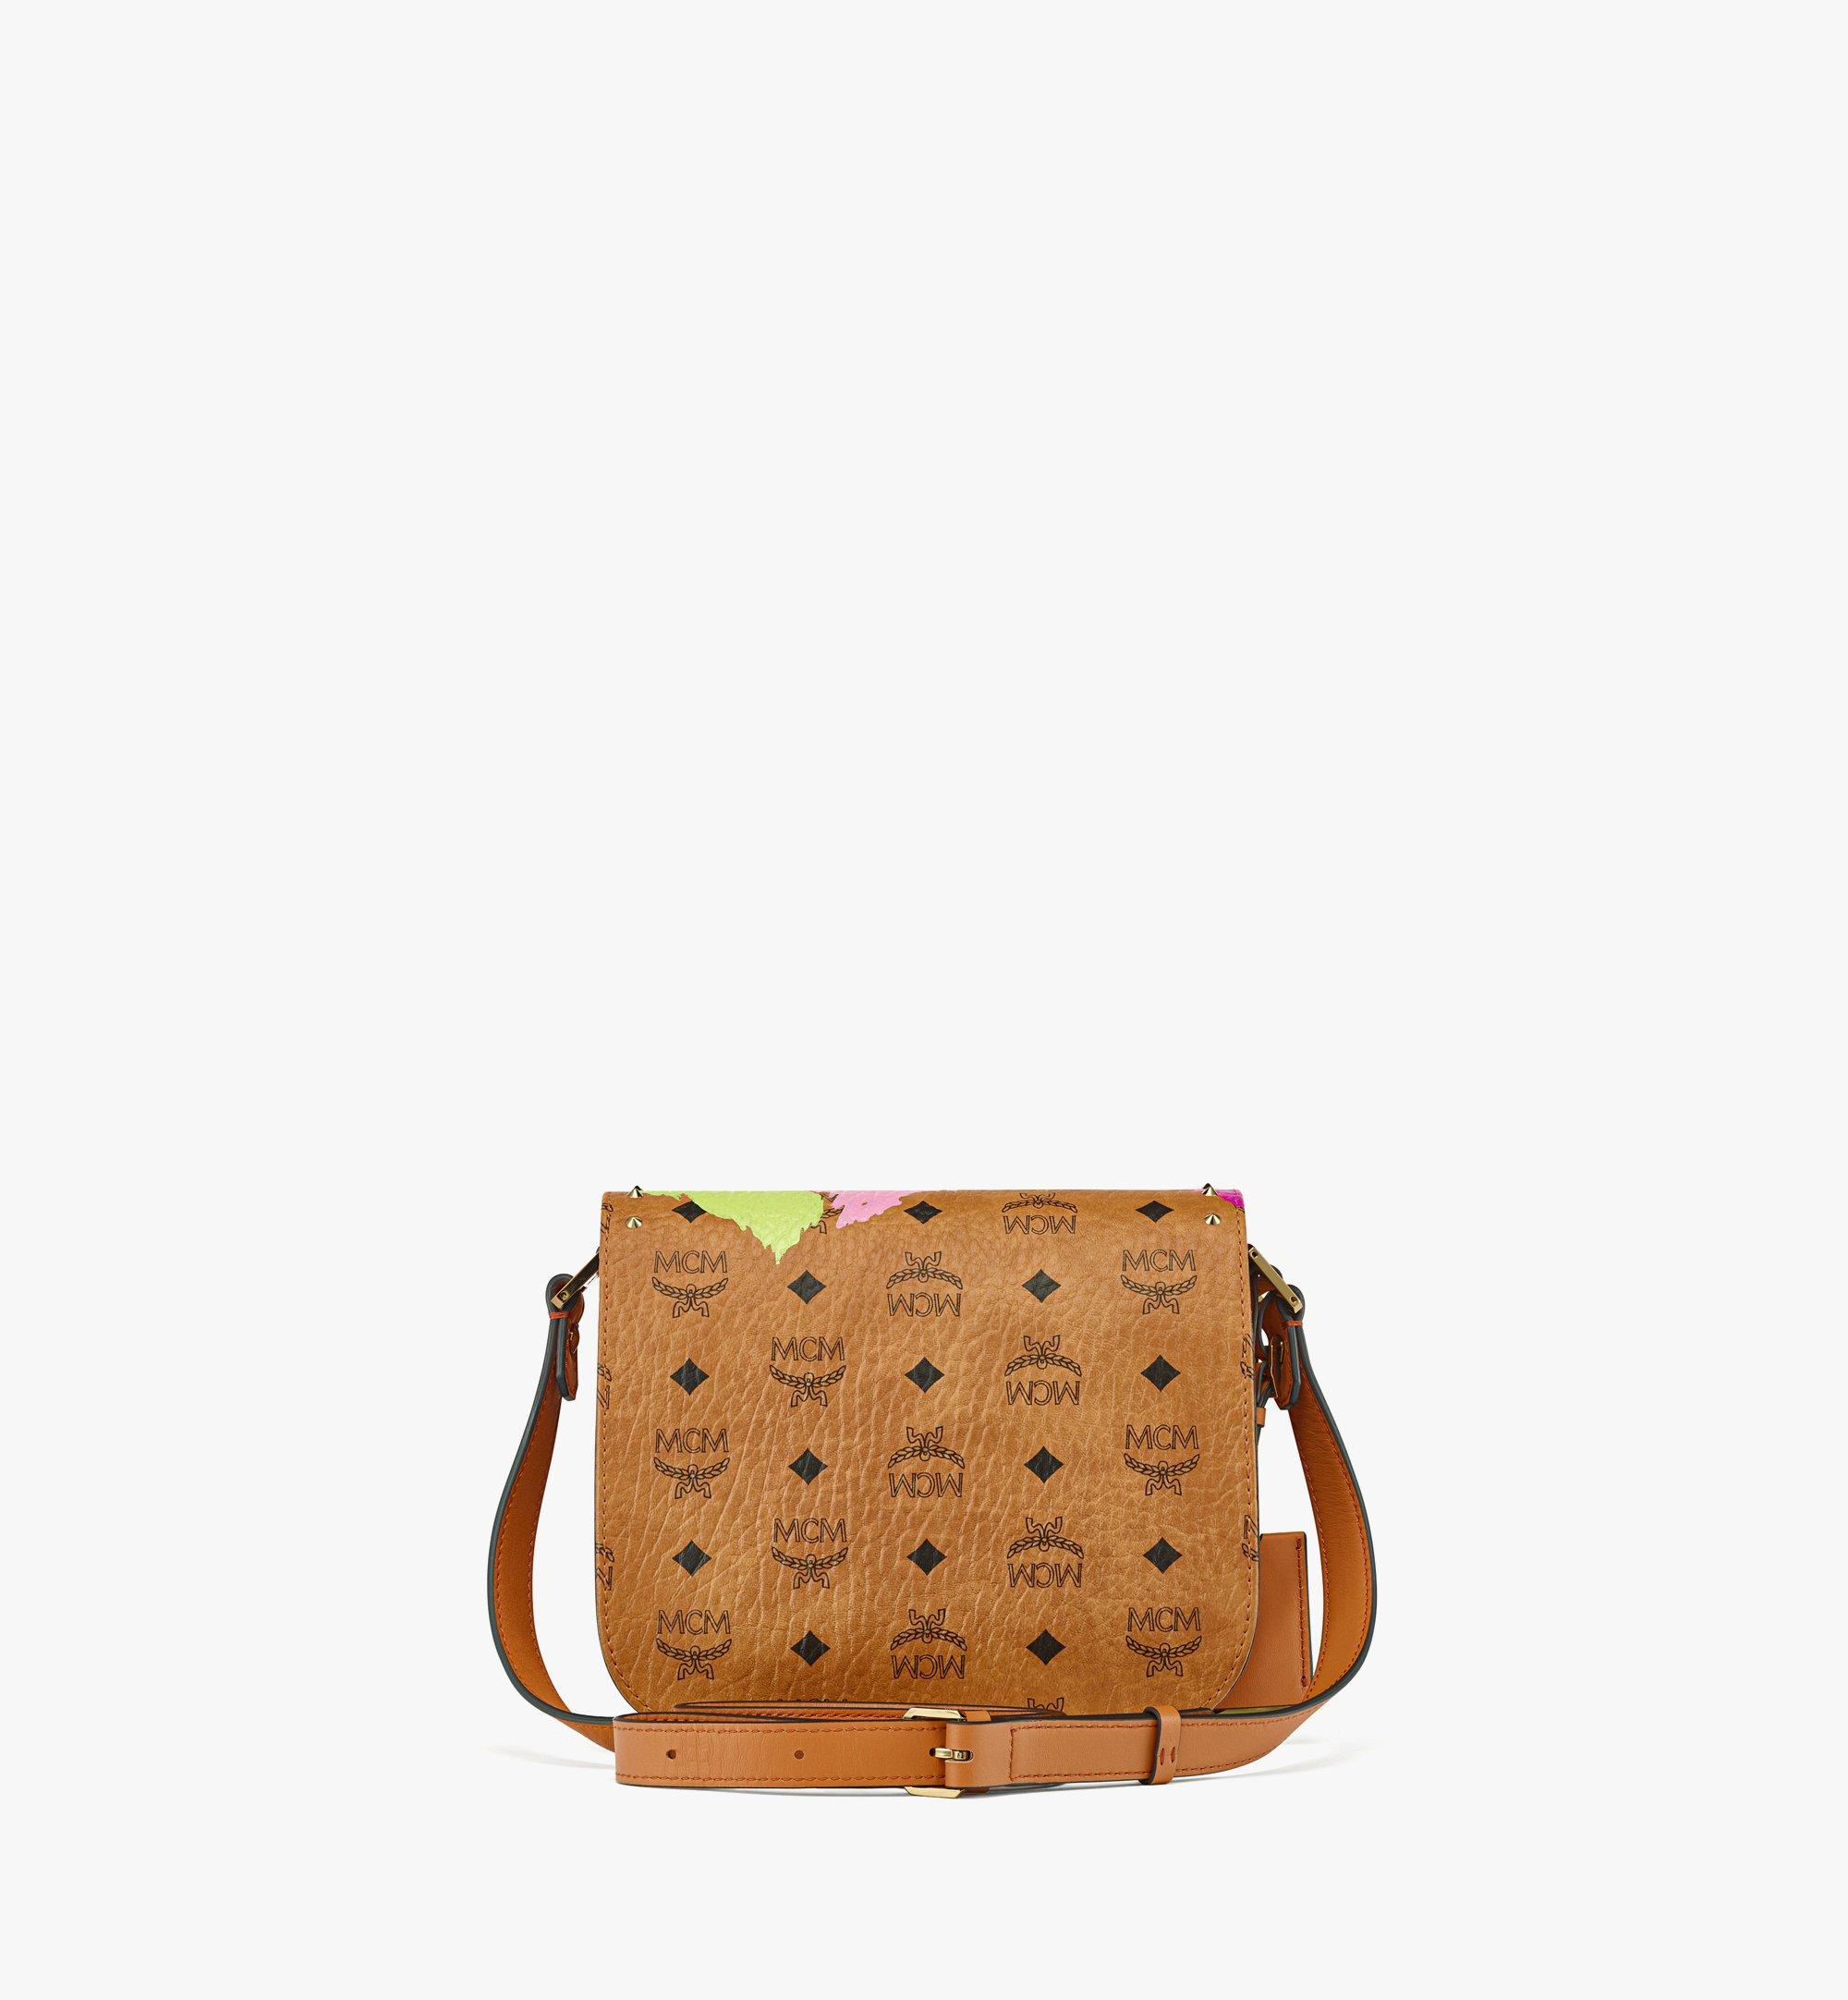 MCM Upcycling Project Tracy Shoulder Bag in Visetos Cognac MWSCSUP07CO001 Alternate View 3